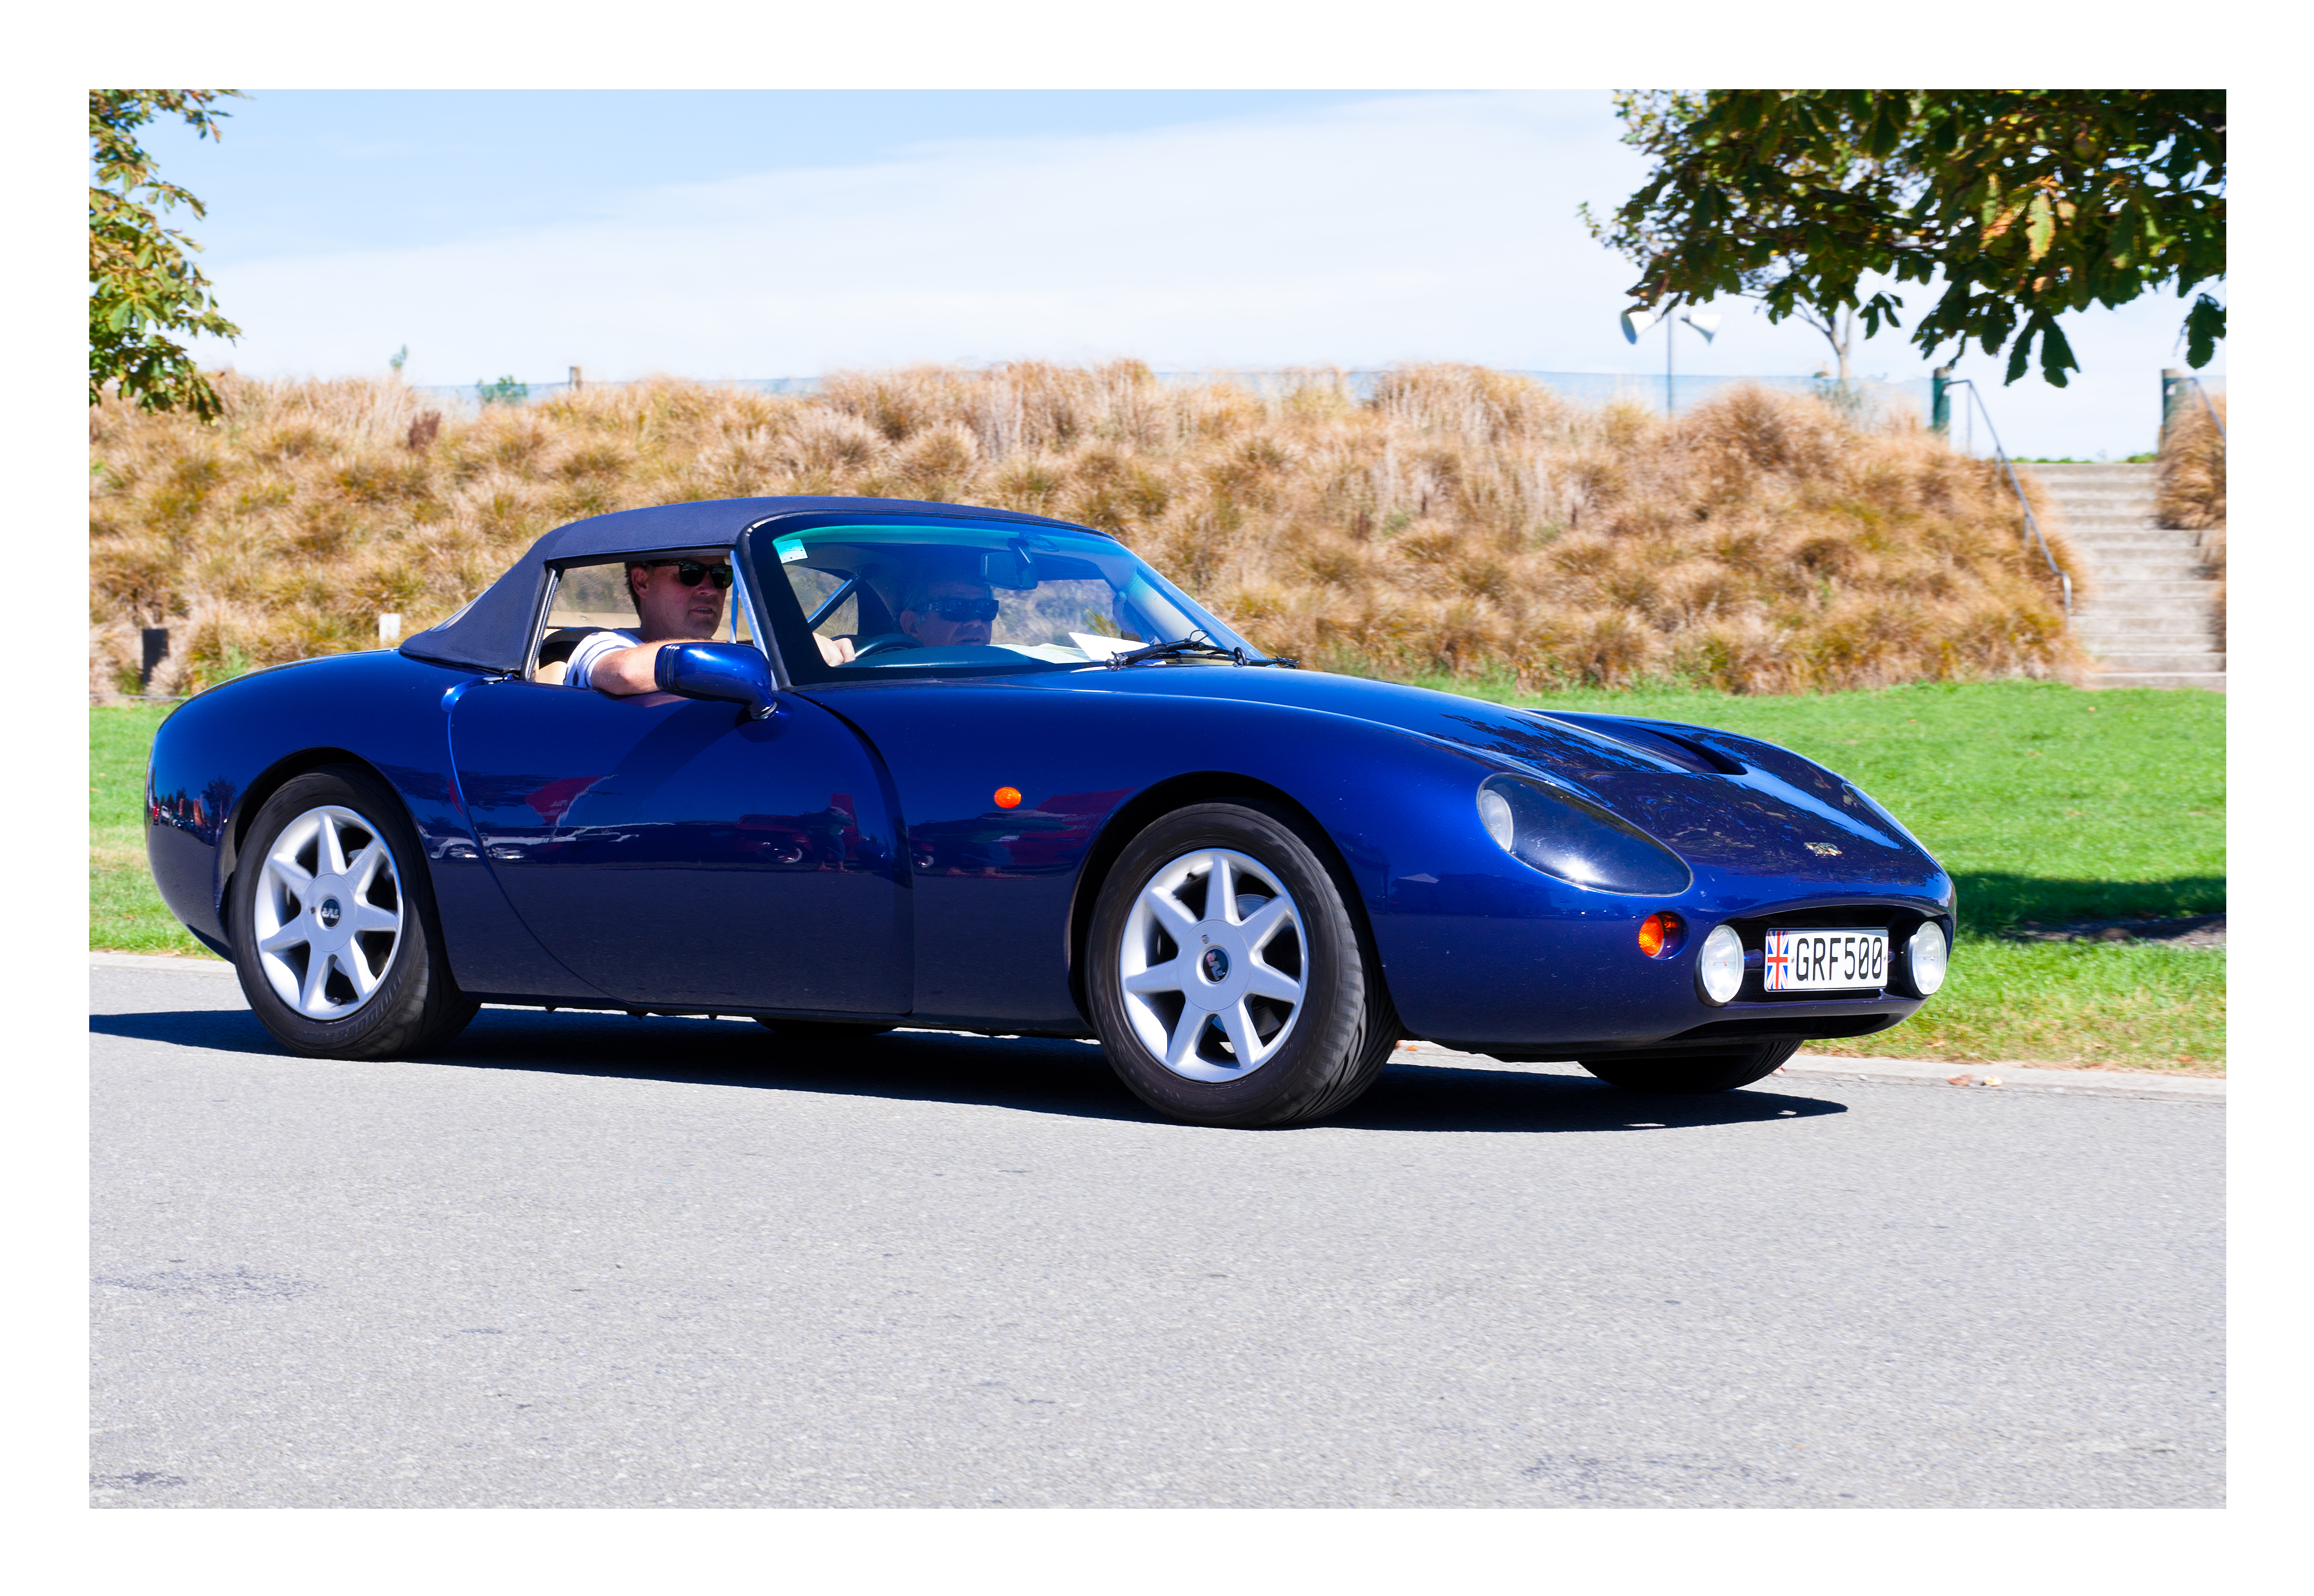 Tvr griffith 500 from 2001 photo